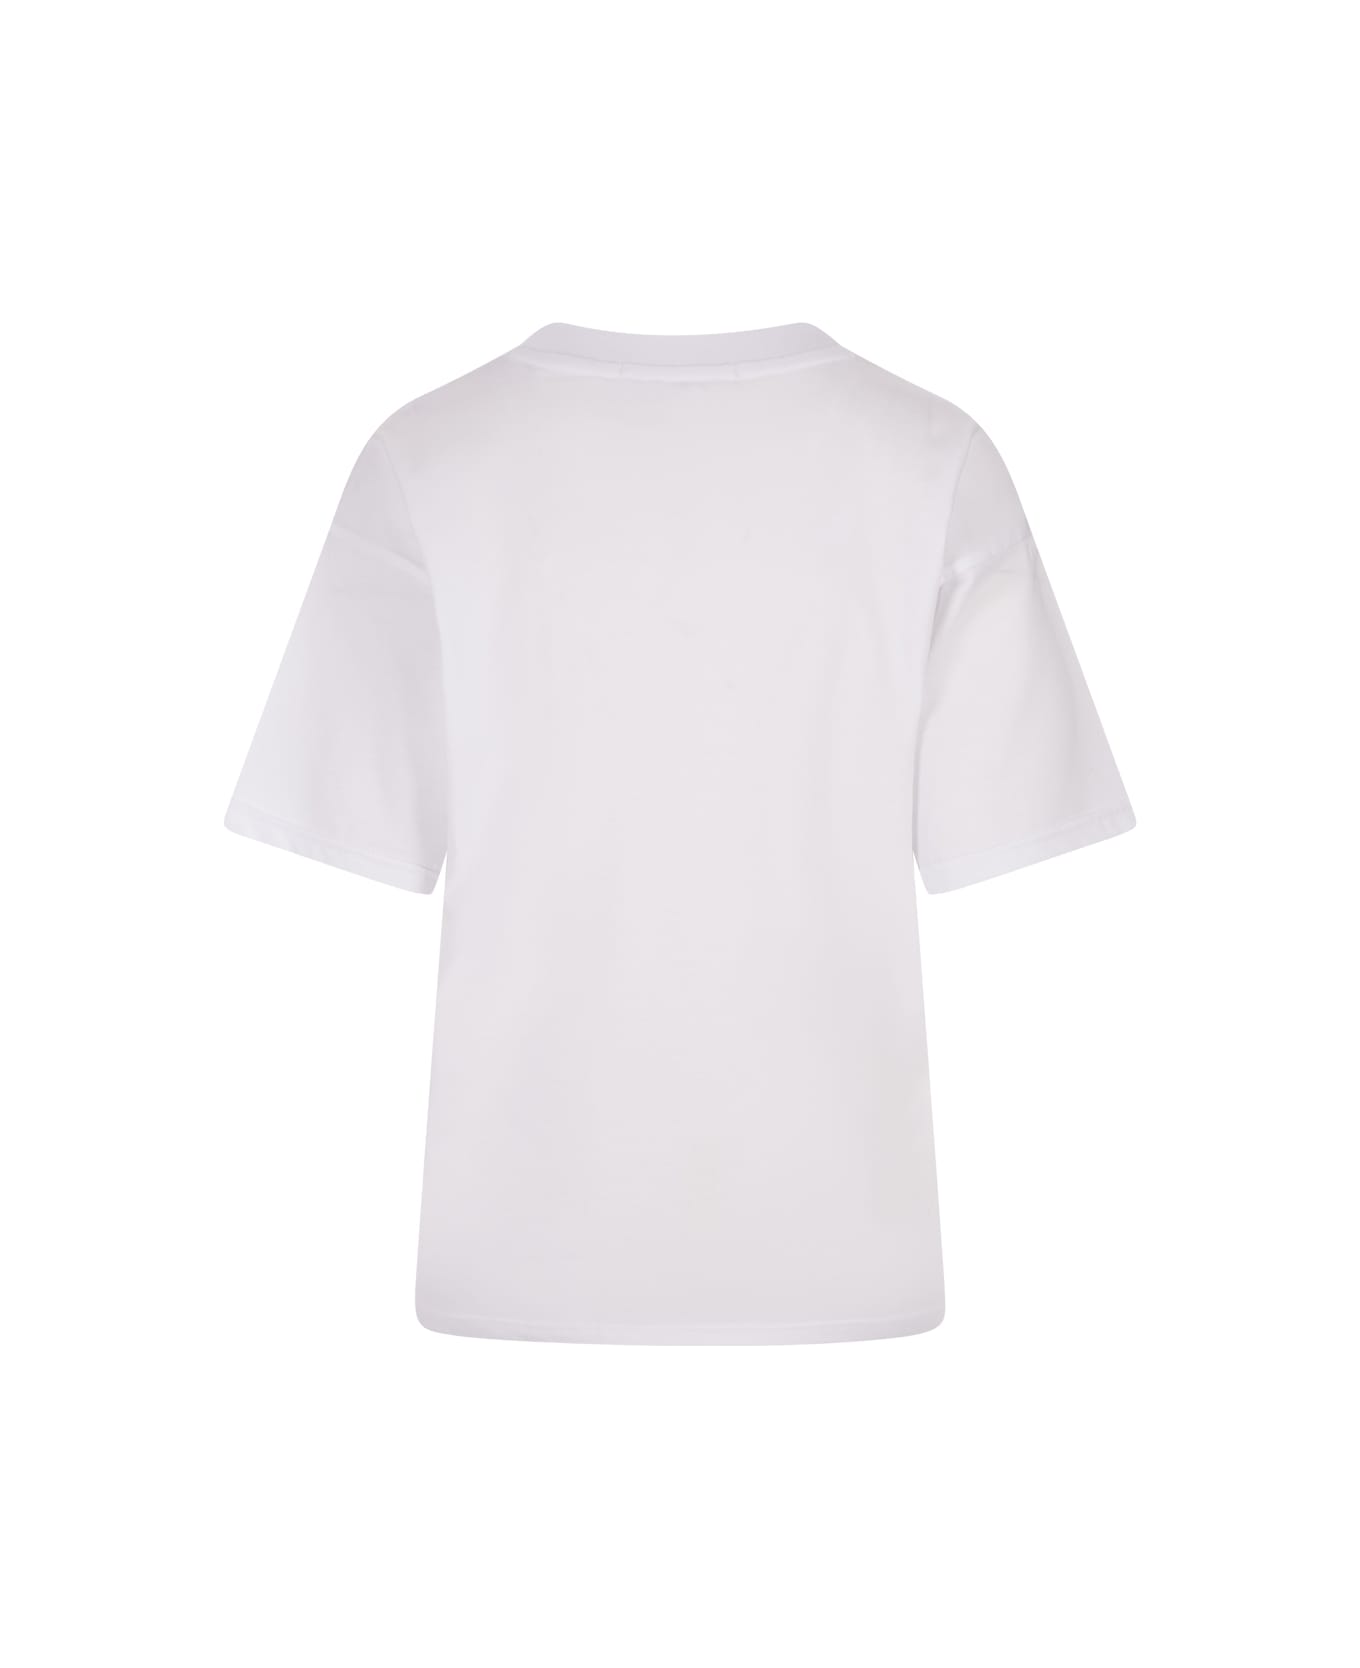 Alessandro Enriquez White T-shirt With Stars Embroidery - White